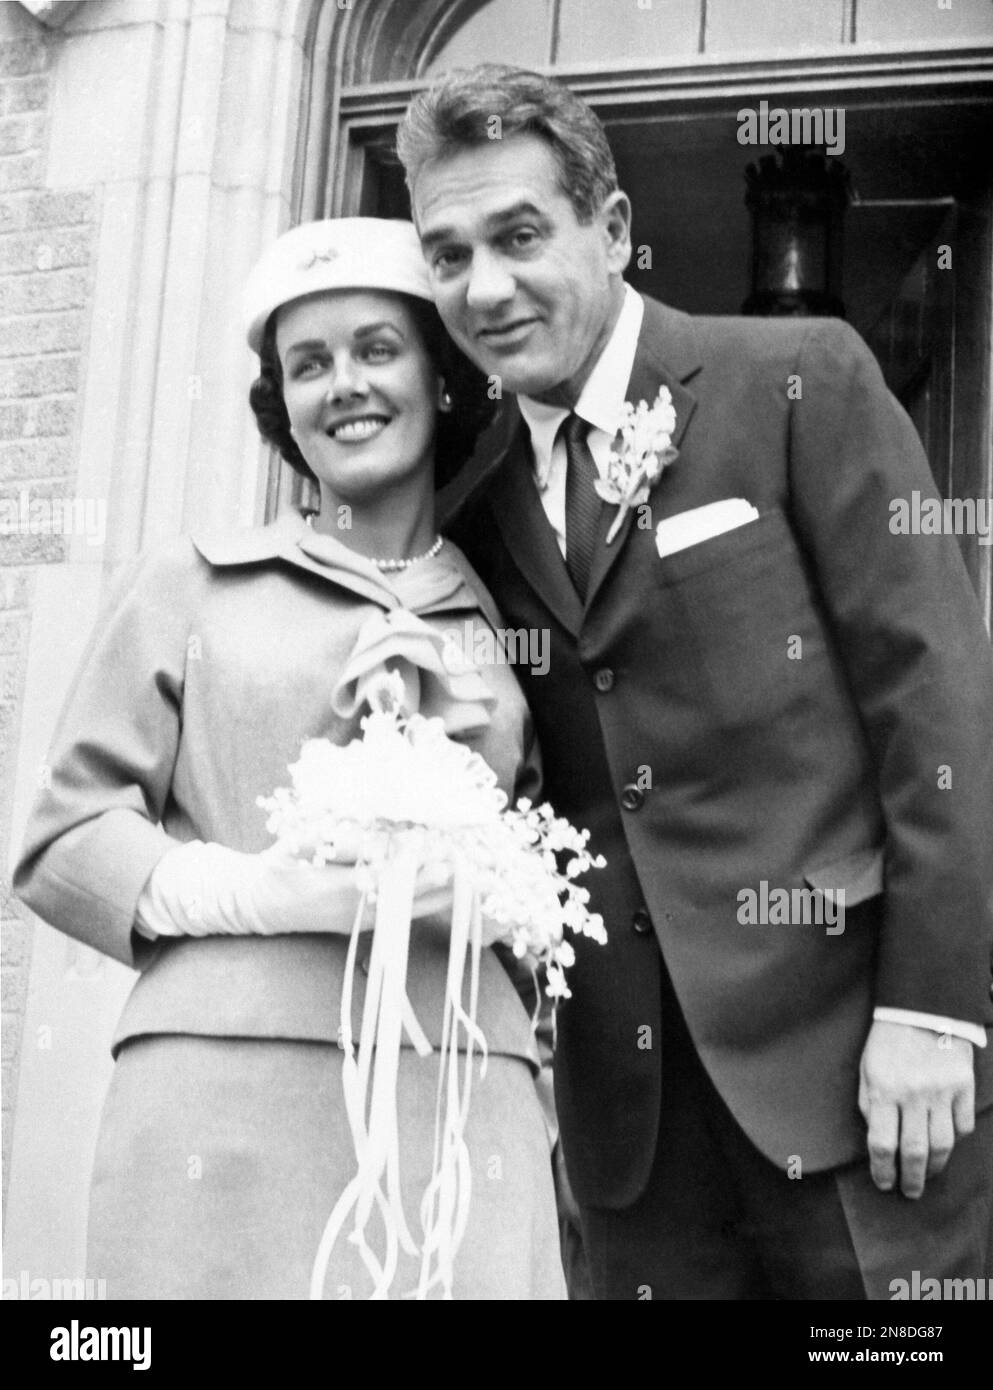 American jazz and big band drummer, orchestra leader Gene Krupa and his bride, the former Patricia A. Bowler, 25-year-old secretary of Springfield, Mass. pose on the steps of St. Dennis Roman Catholic Church in Yonkers, N.Y., United States on April 23, 1959. After their wedding Krupa and his wife will leave New York on April 25 for a honeymoon in Europe. (AP Photo) Stock Photo